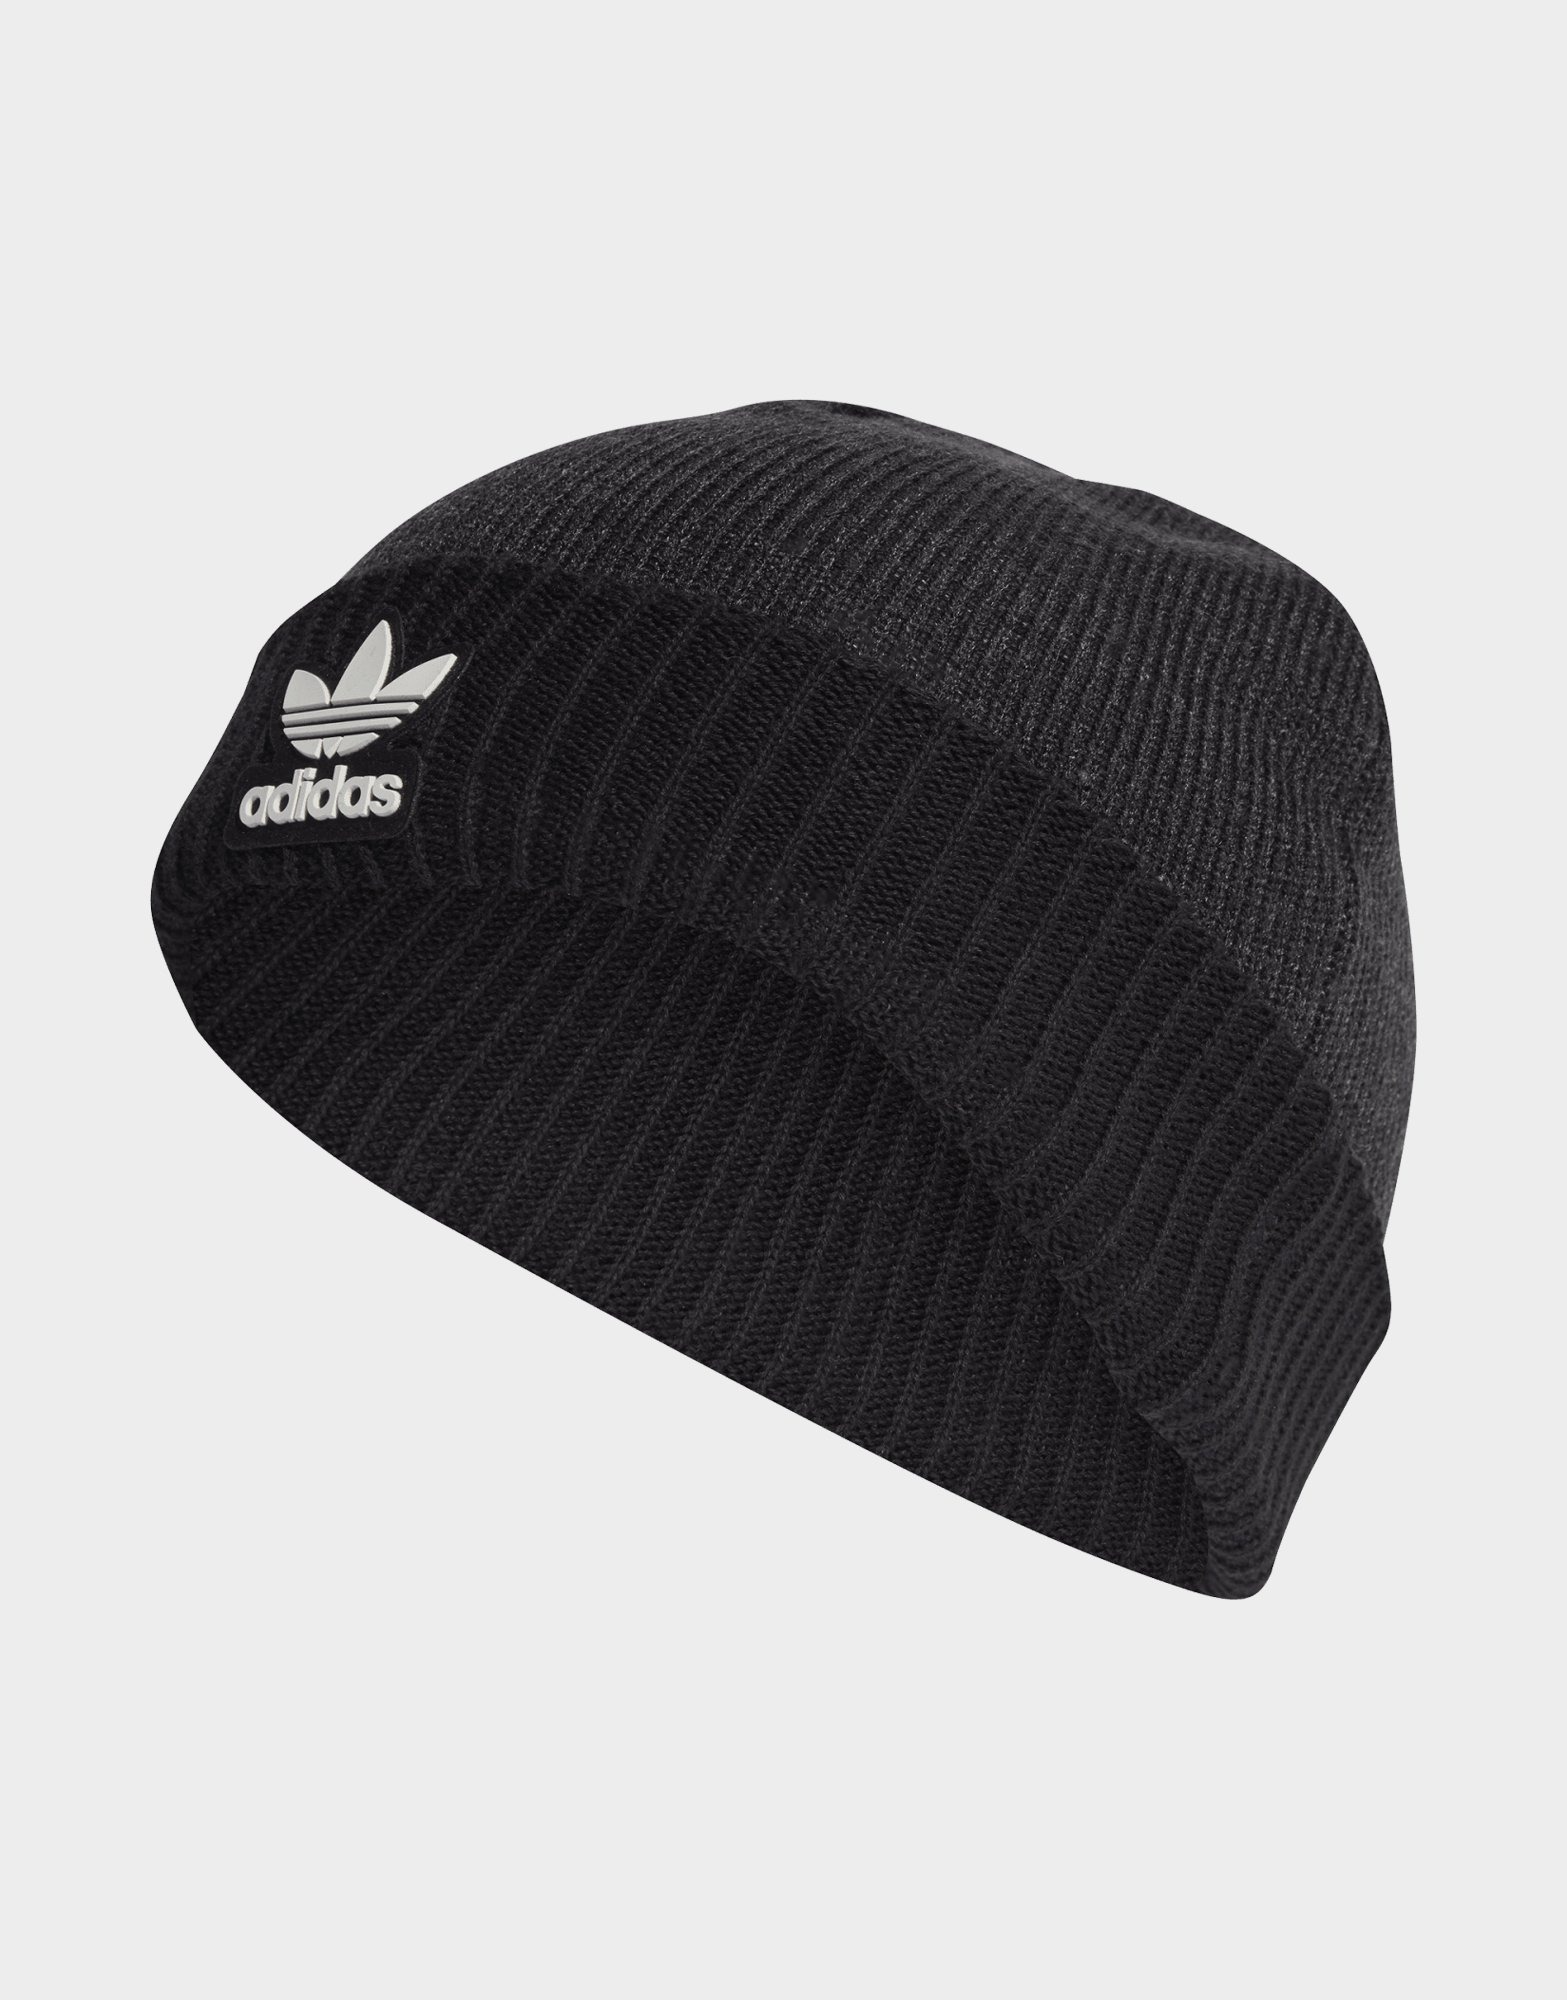 Beanie & Bonnet The North Face Homme - JD Sports France